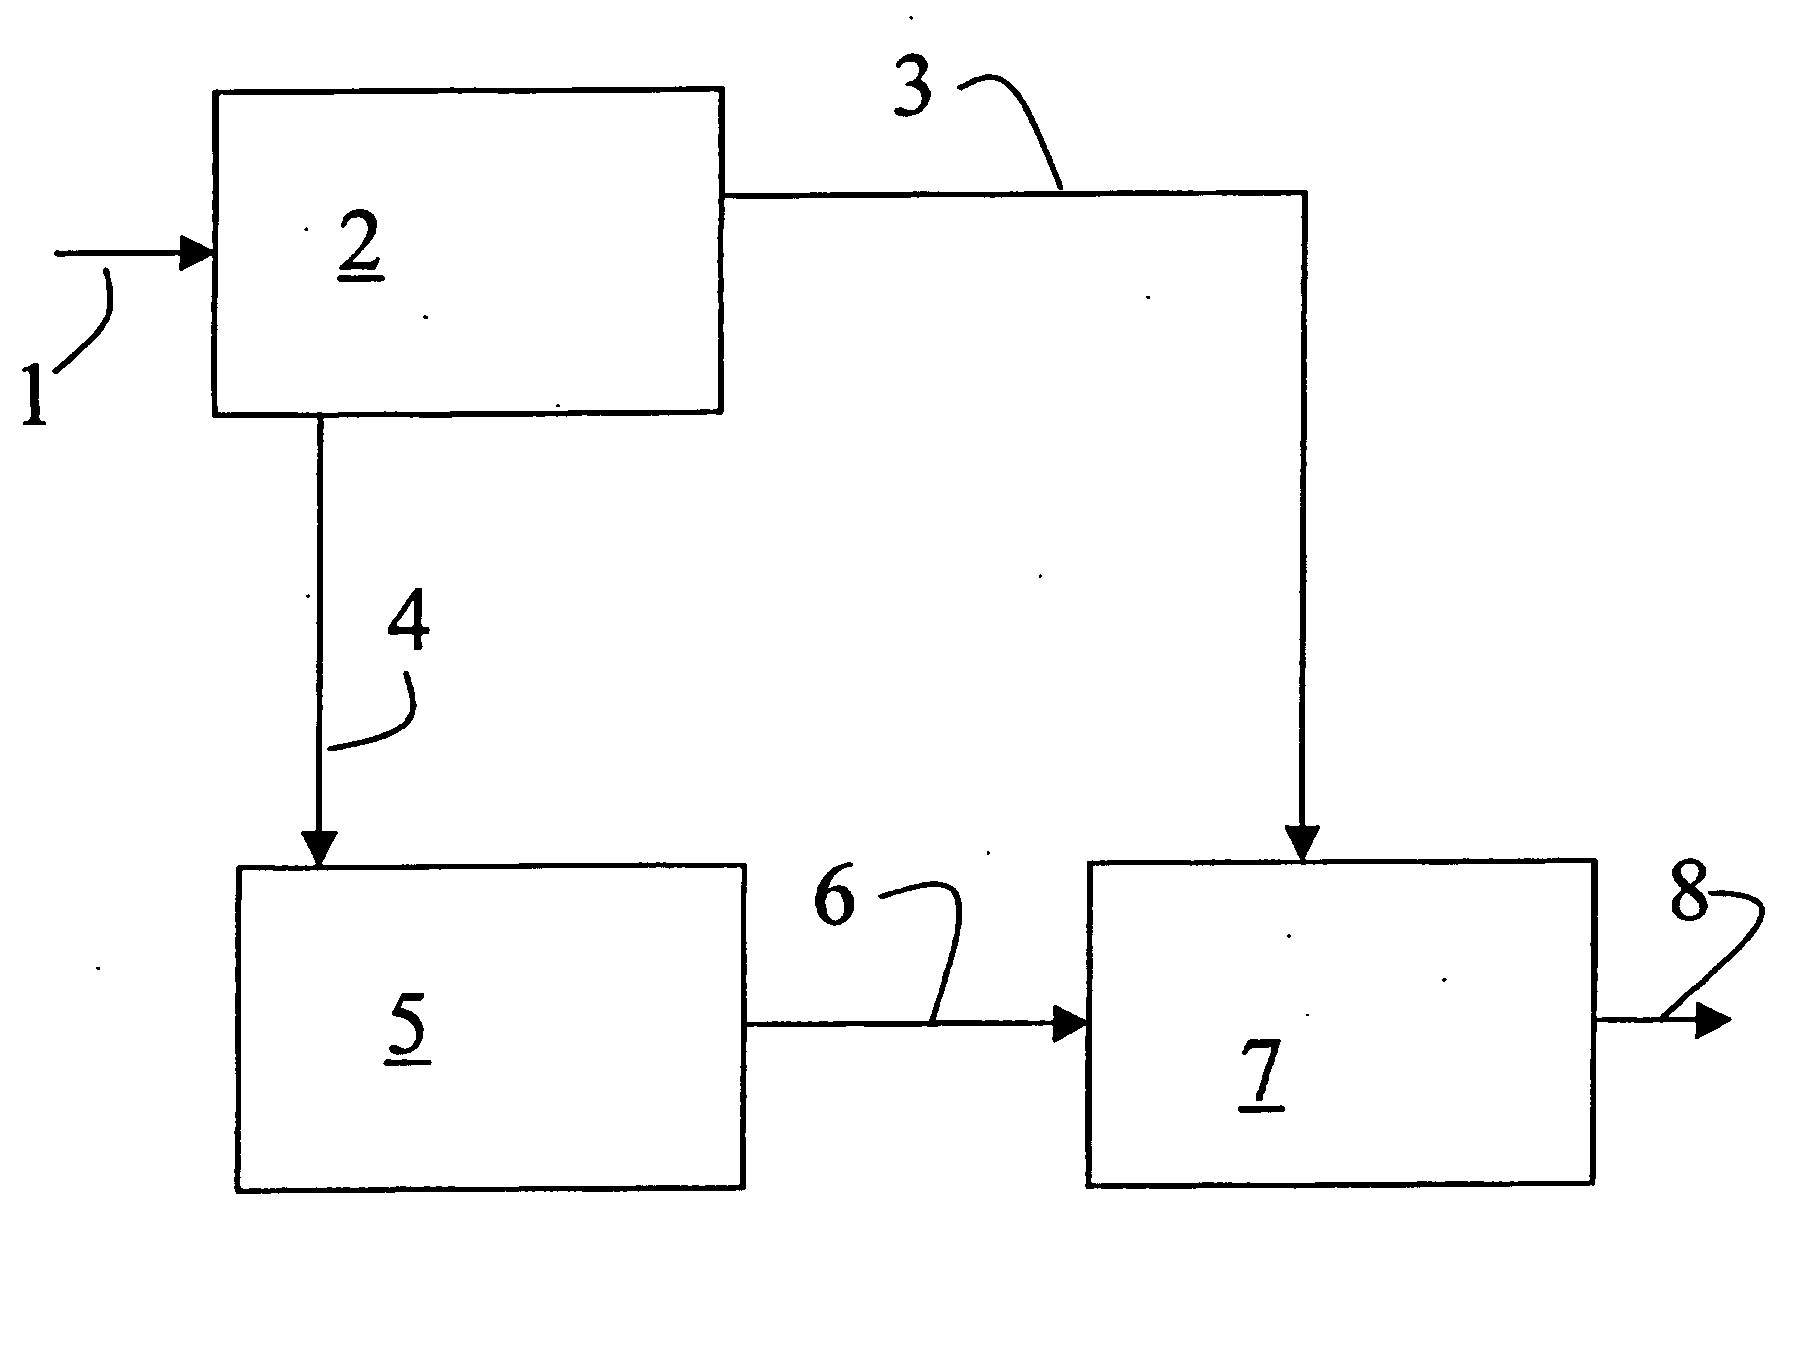 Method for production and upgrading of oil